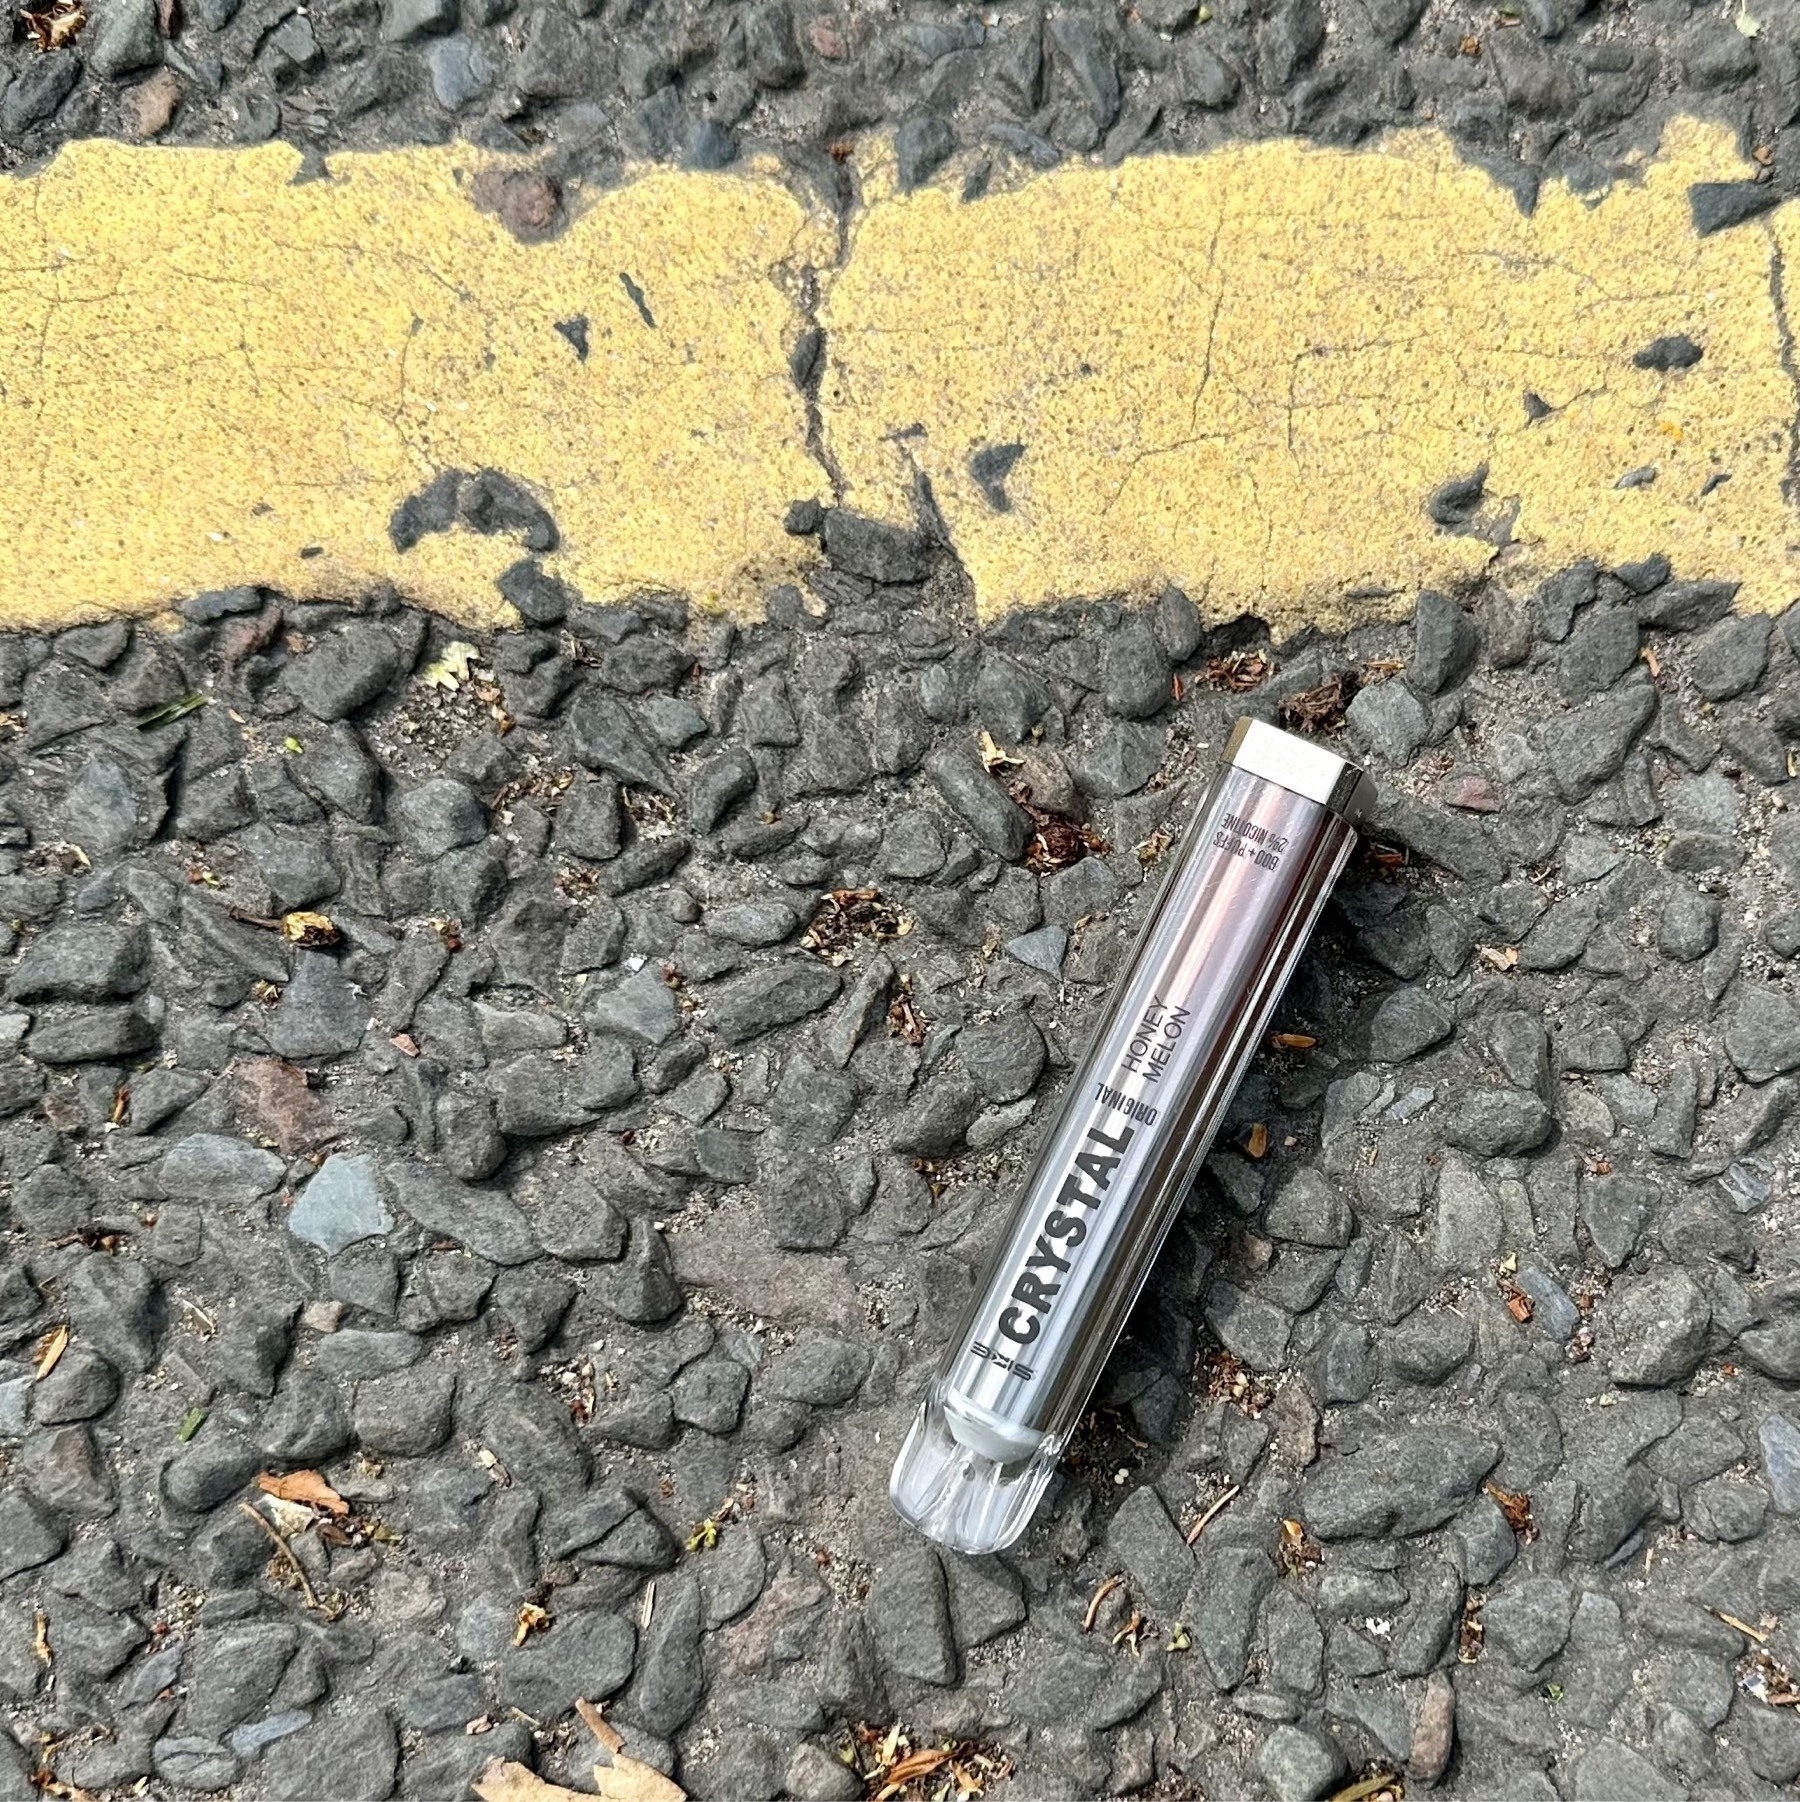 Disposable vape lying discarded in the road